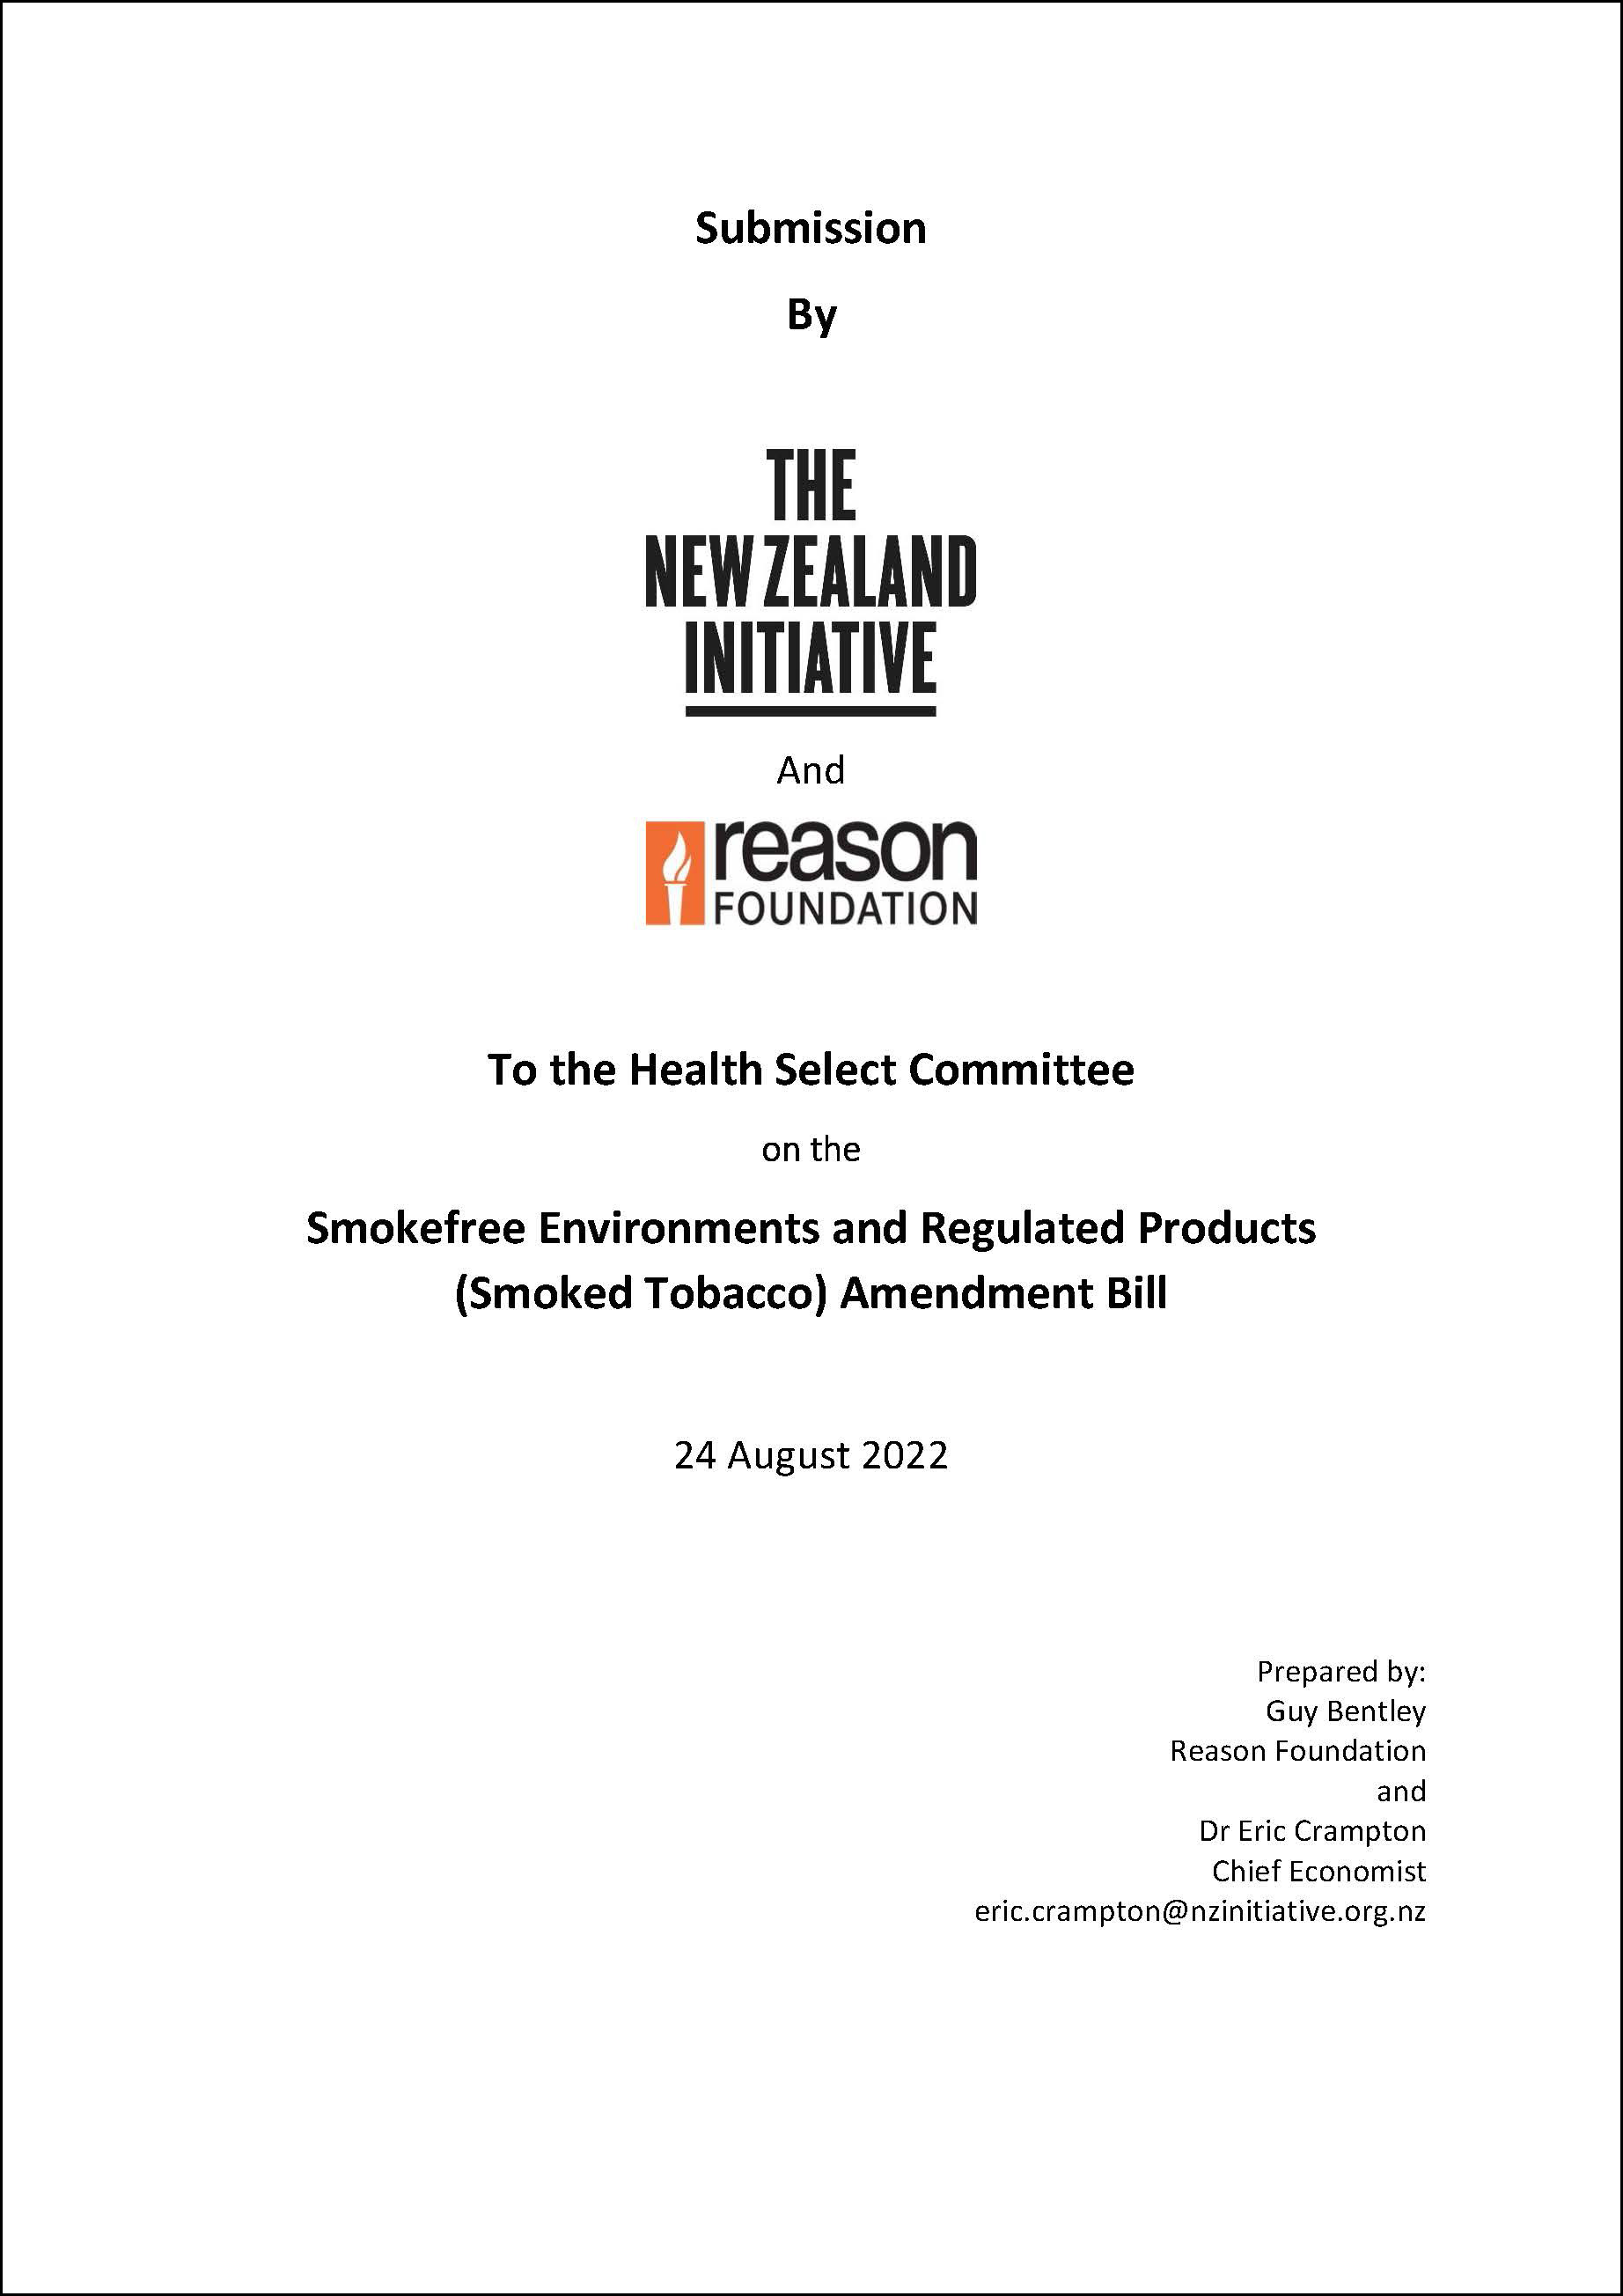 Smokefree submission 24 August 2022 Final cover